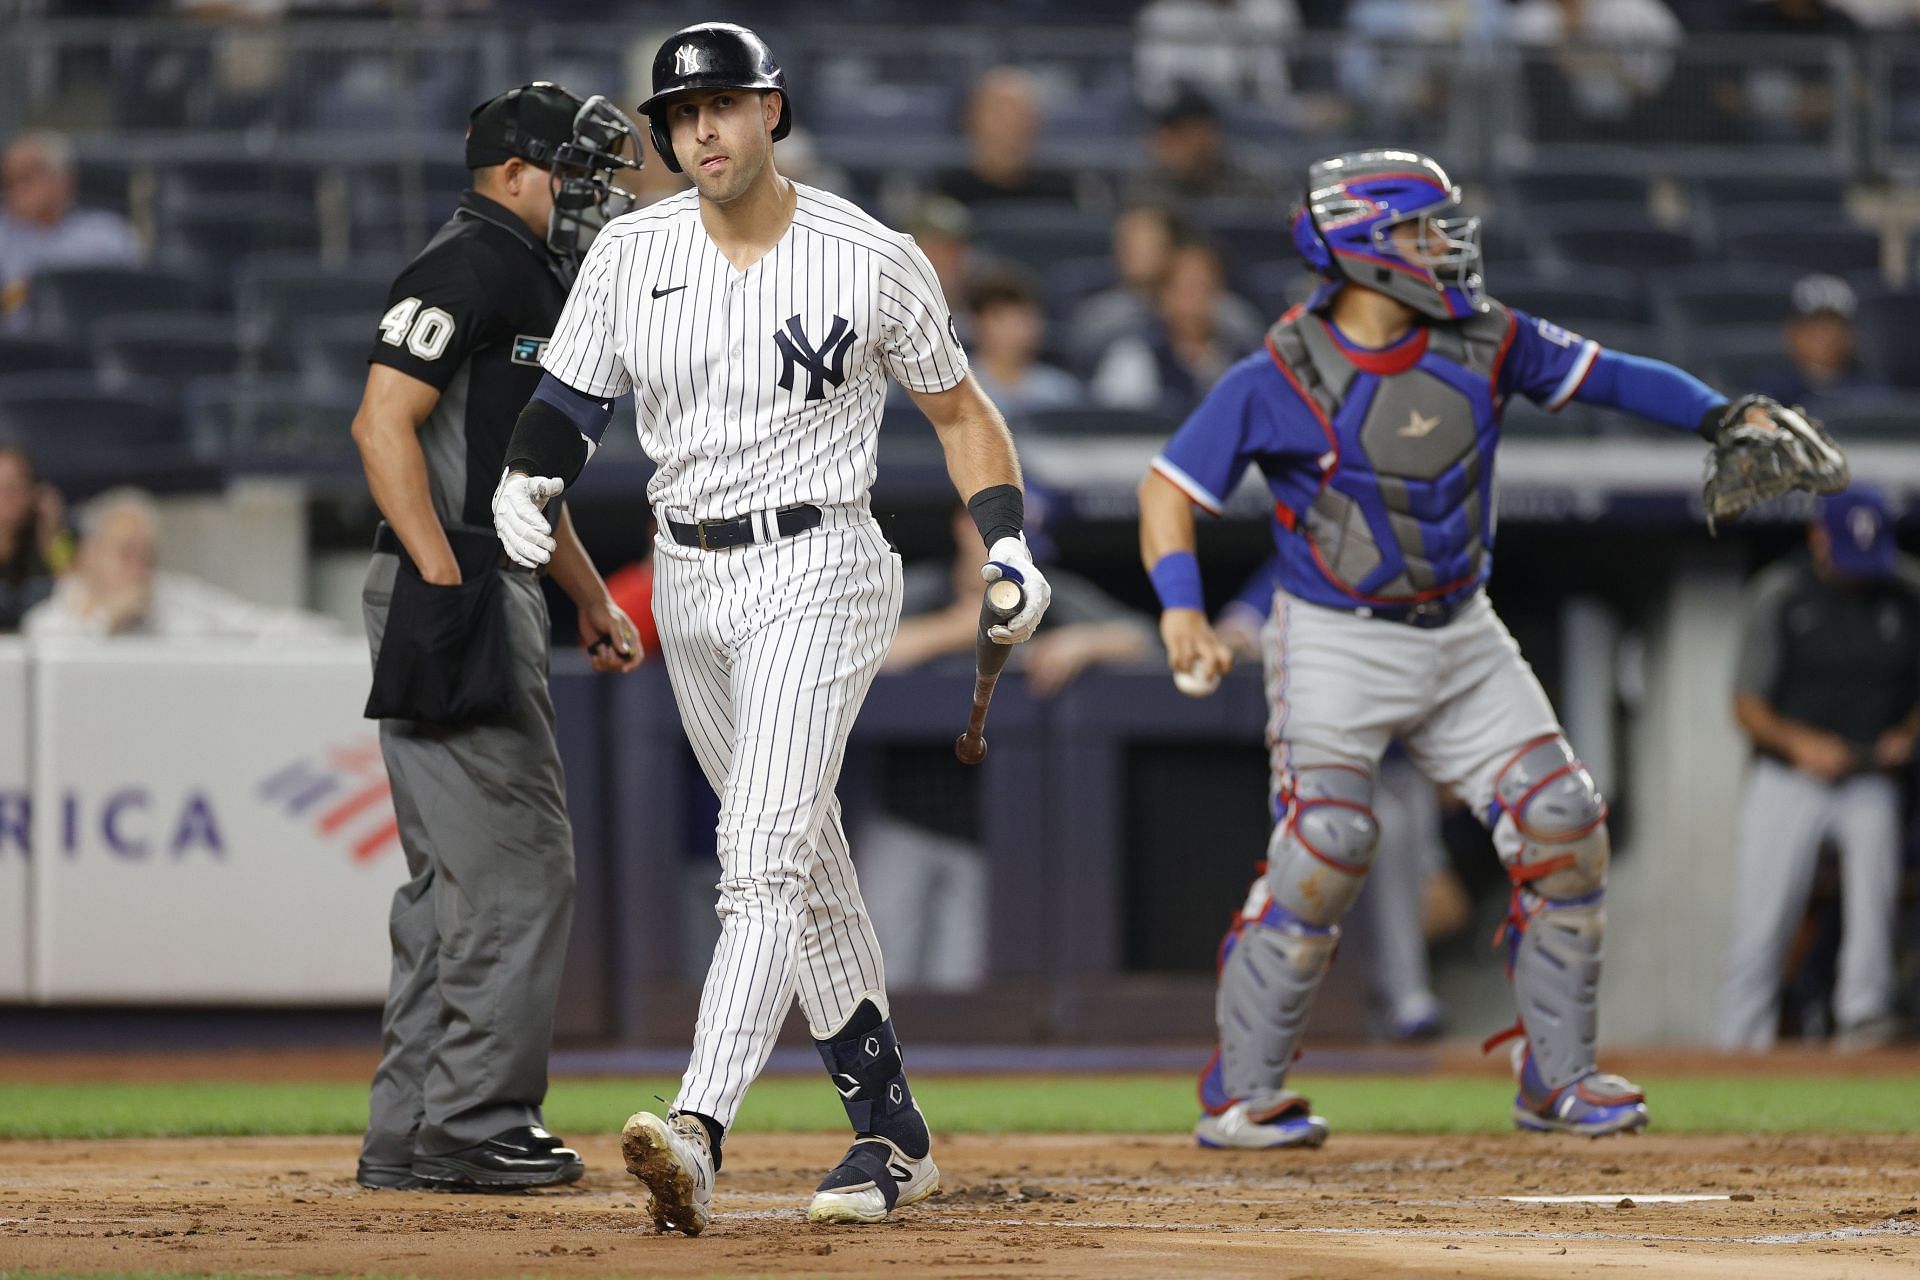 New York Yankees outfielder Joey Gallo has only 7 RBIs this season